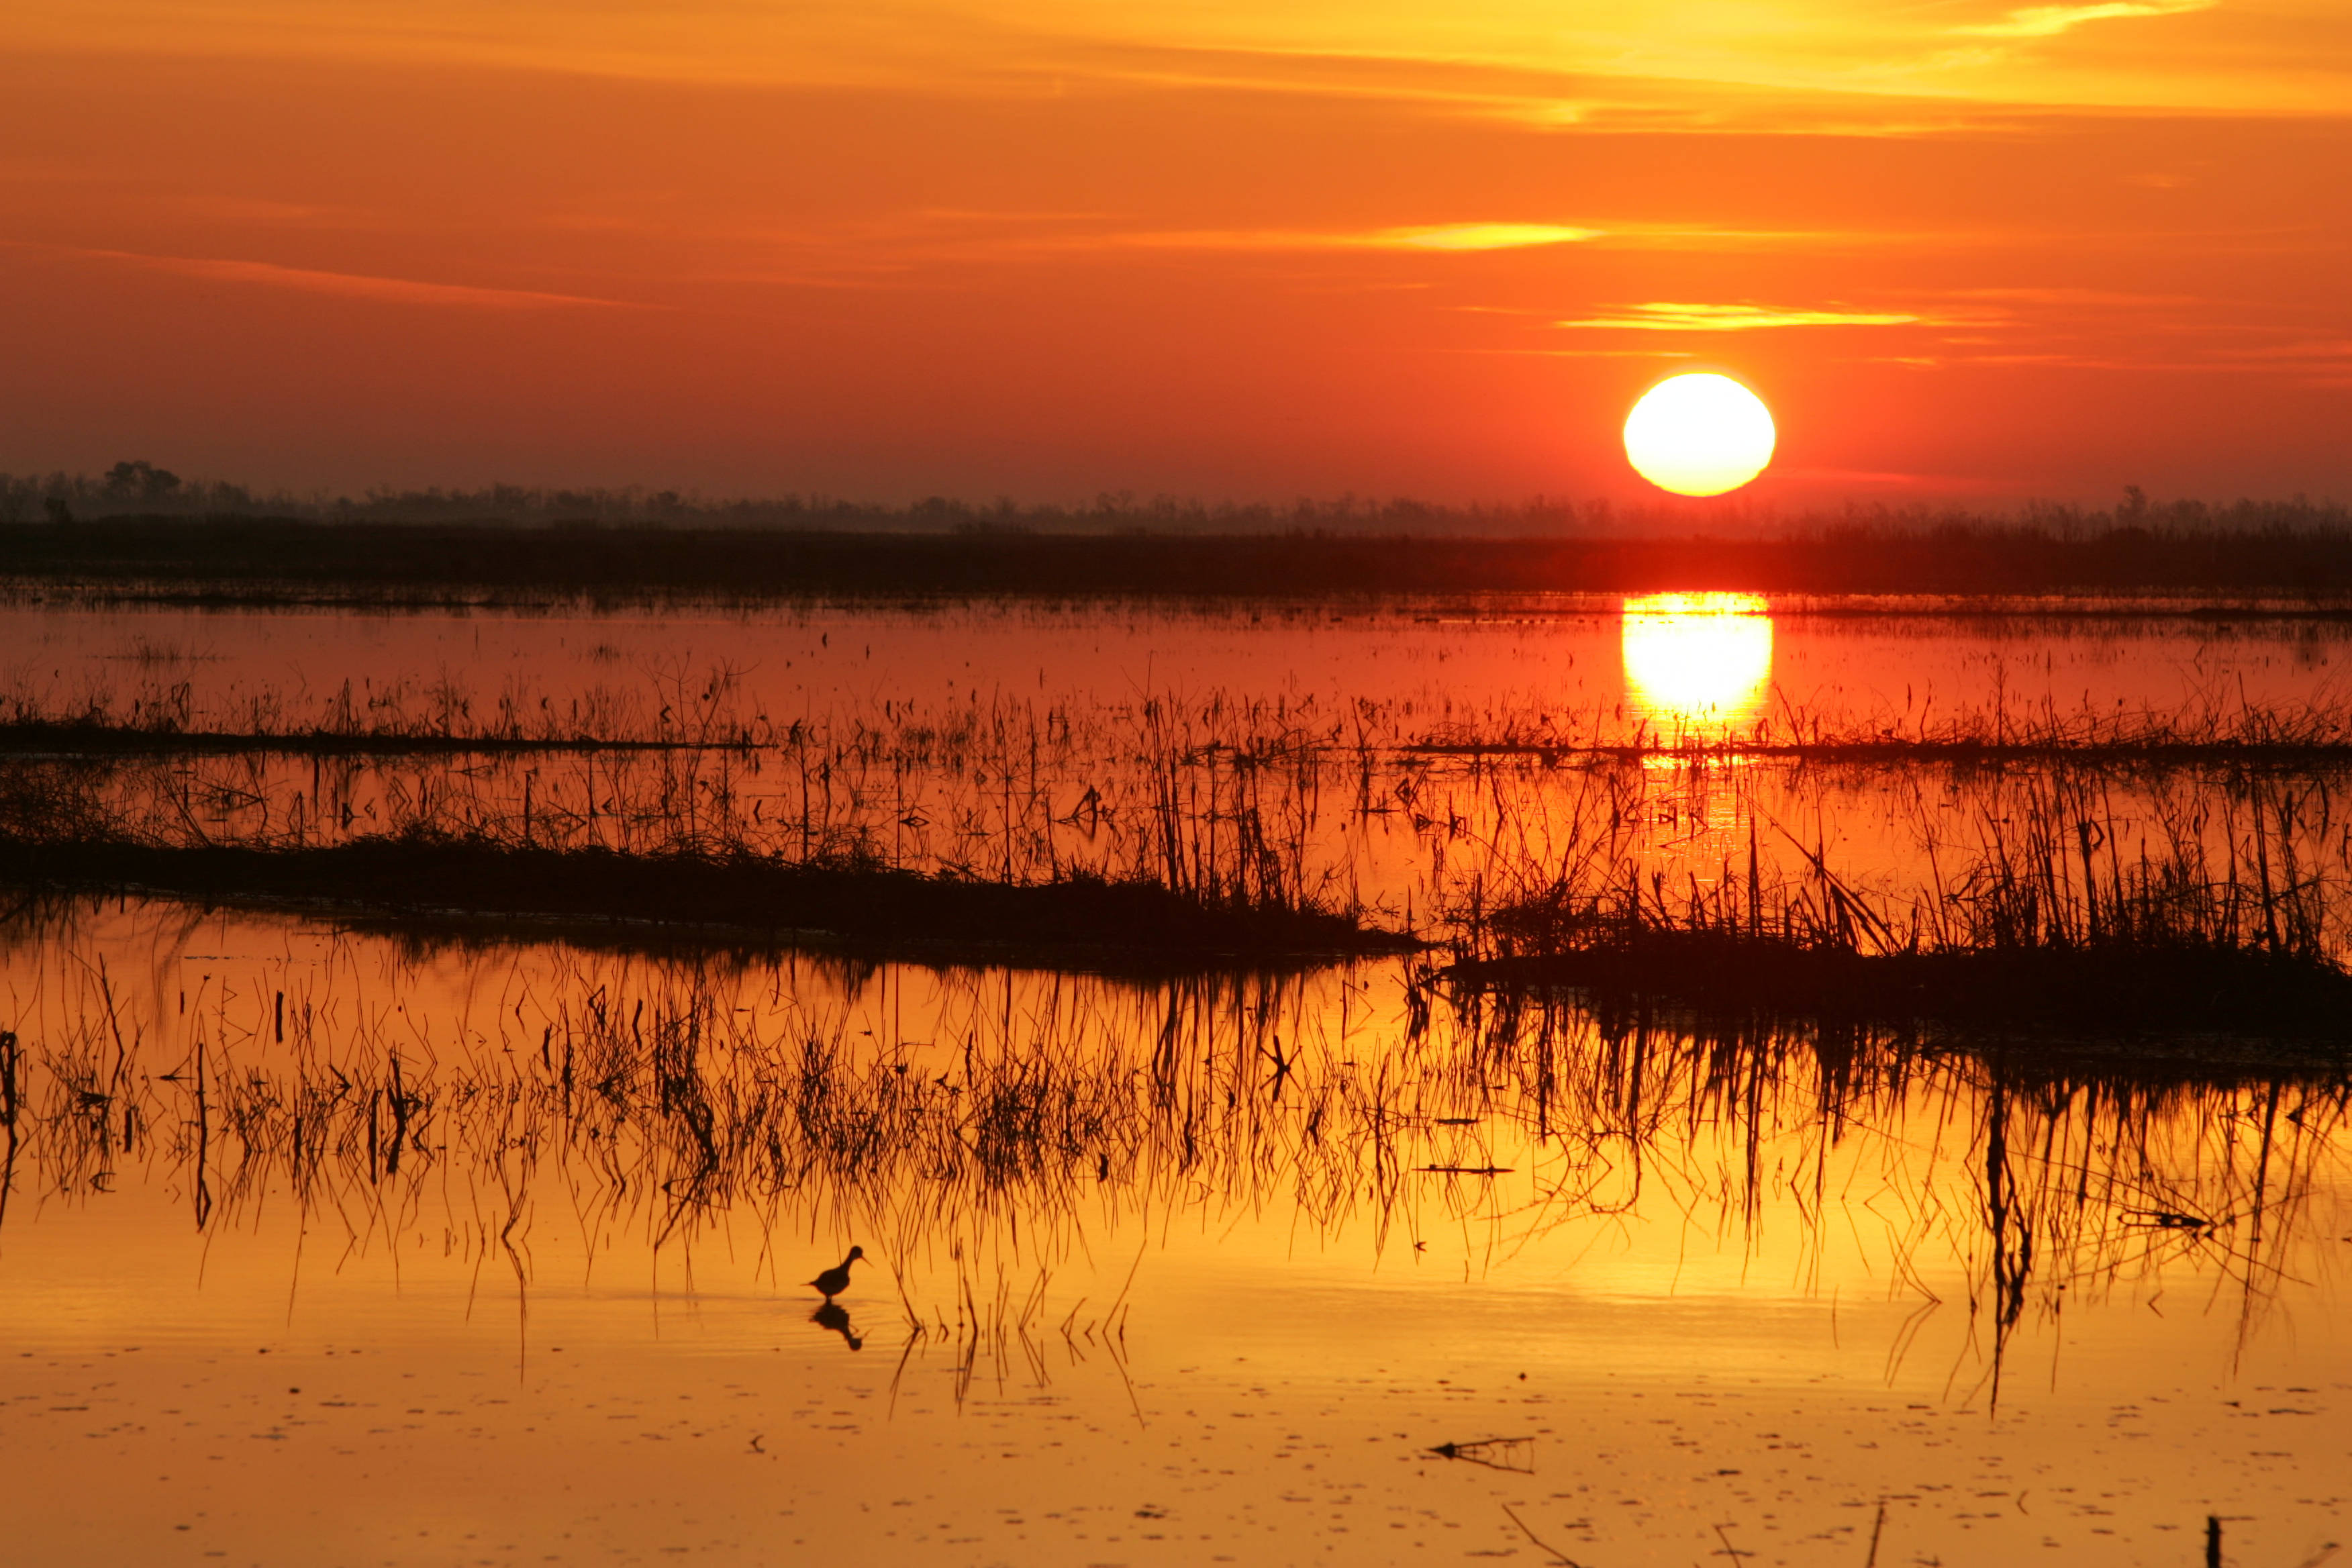 Sunrise over an expansive marsh with a wading bird in the foreground